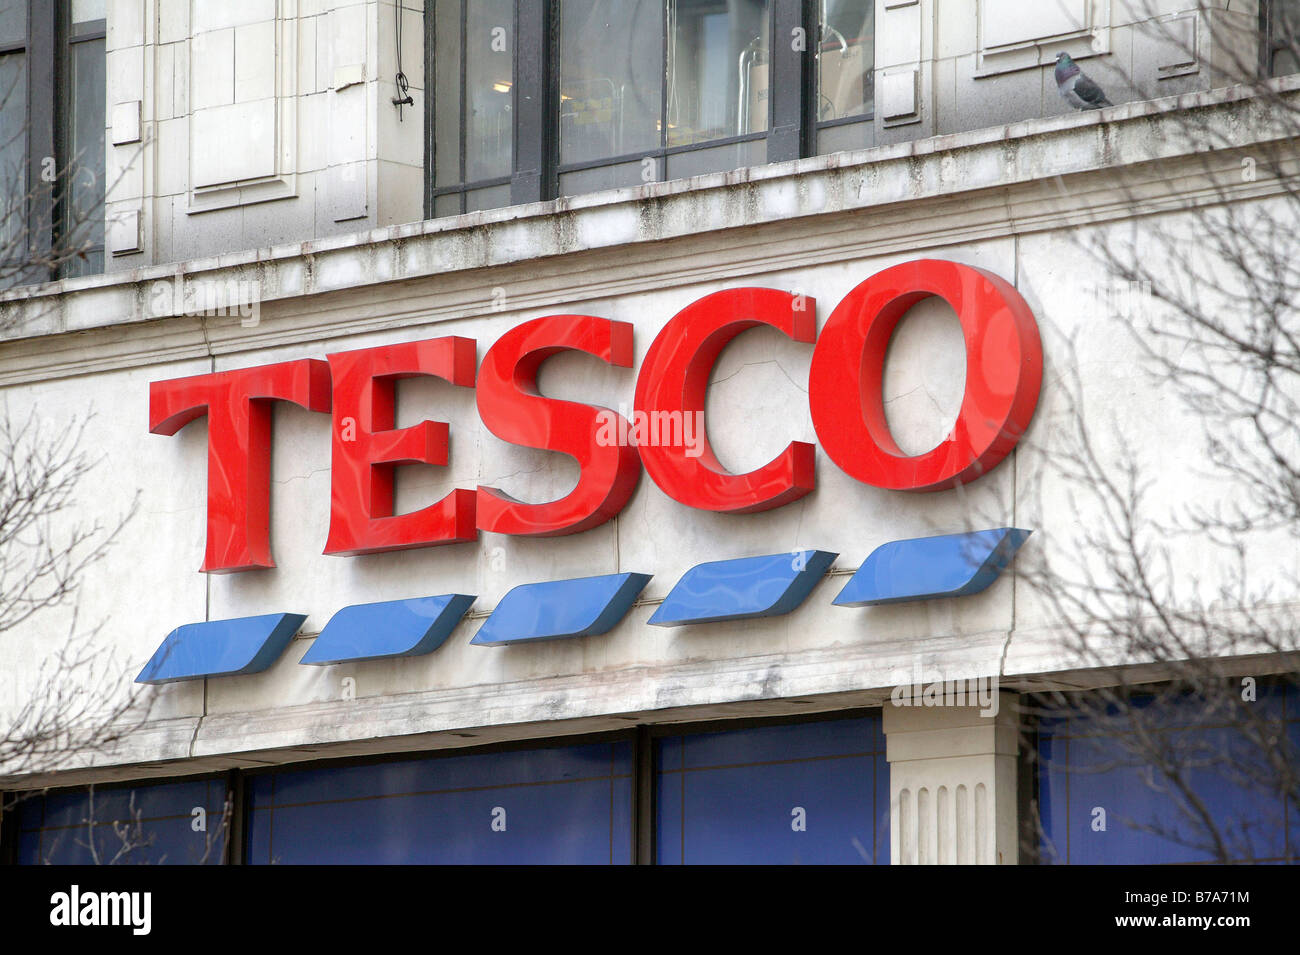 Logo of a branch of the supermarket chain Tesco in London, England, Great Britain, Europe Stock Photo